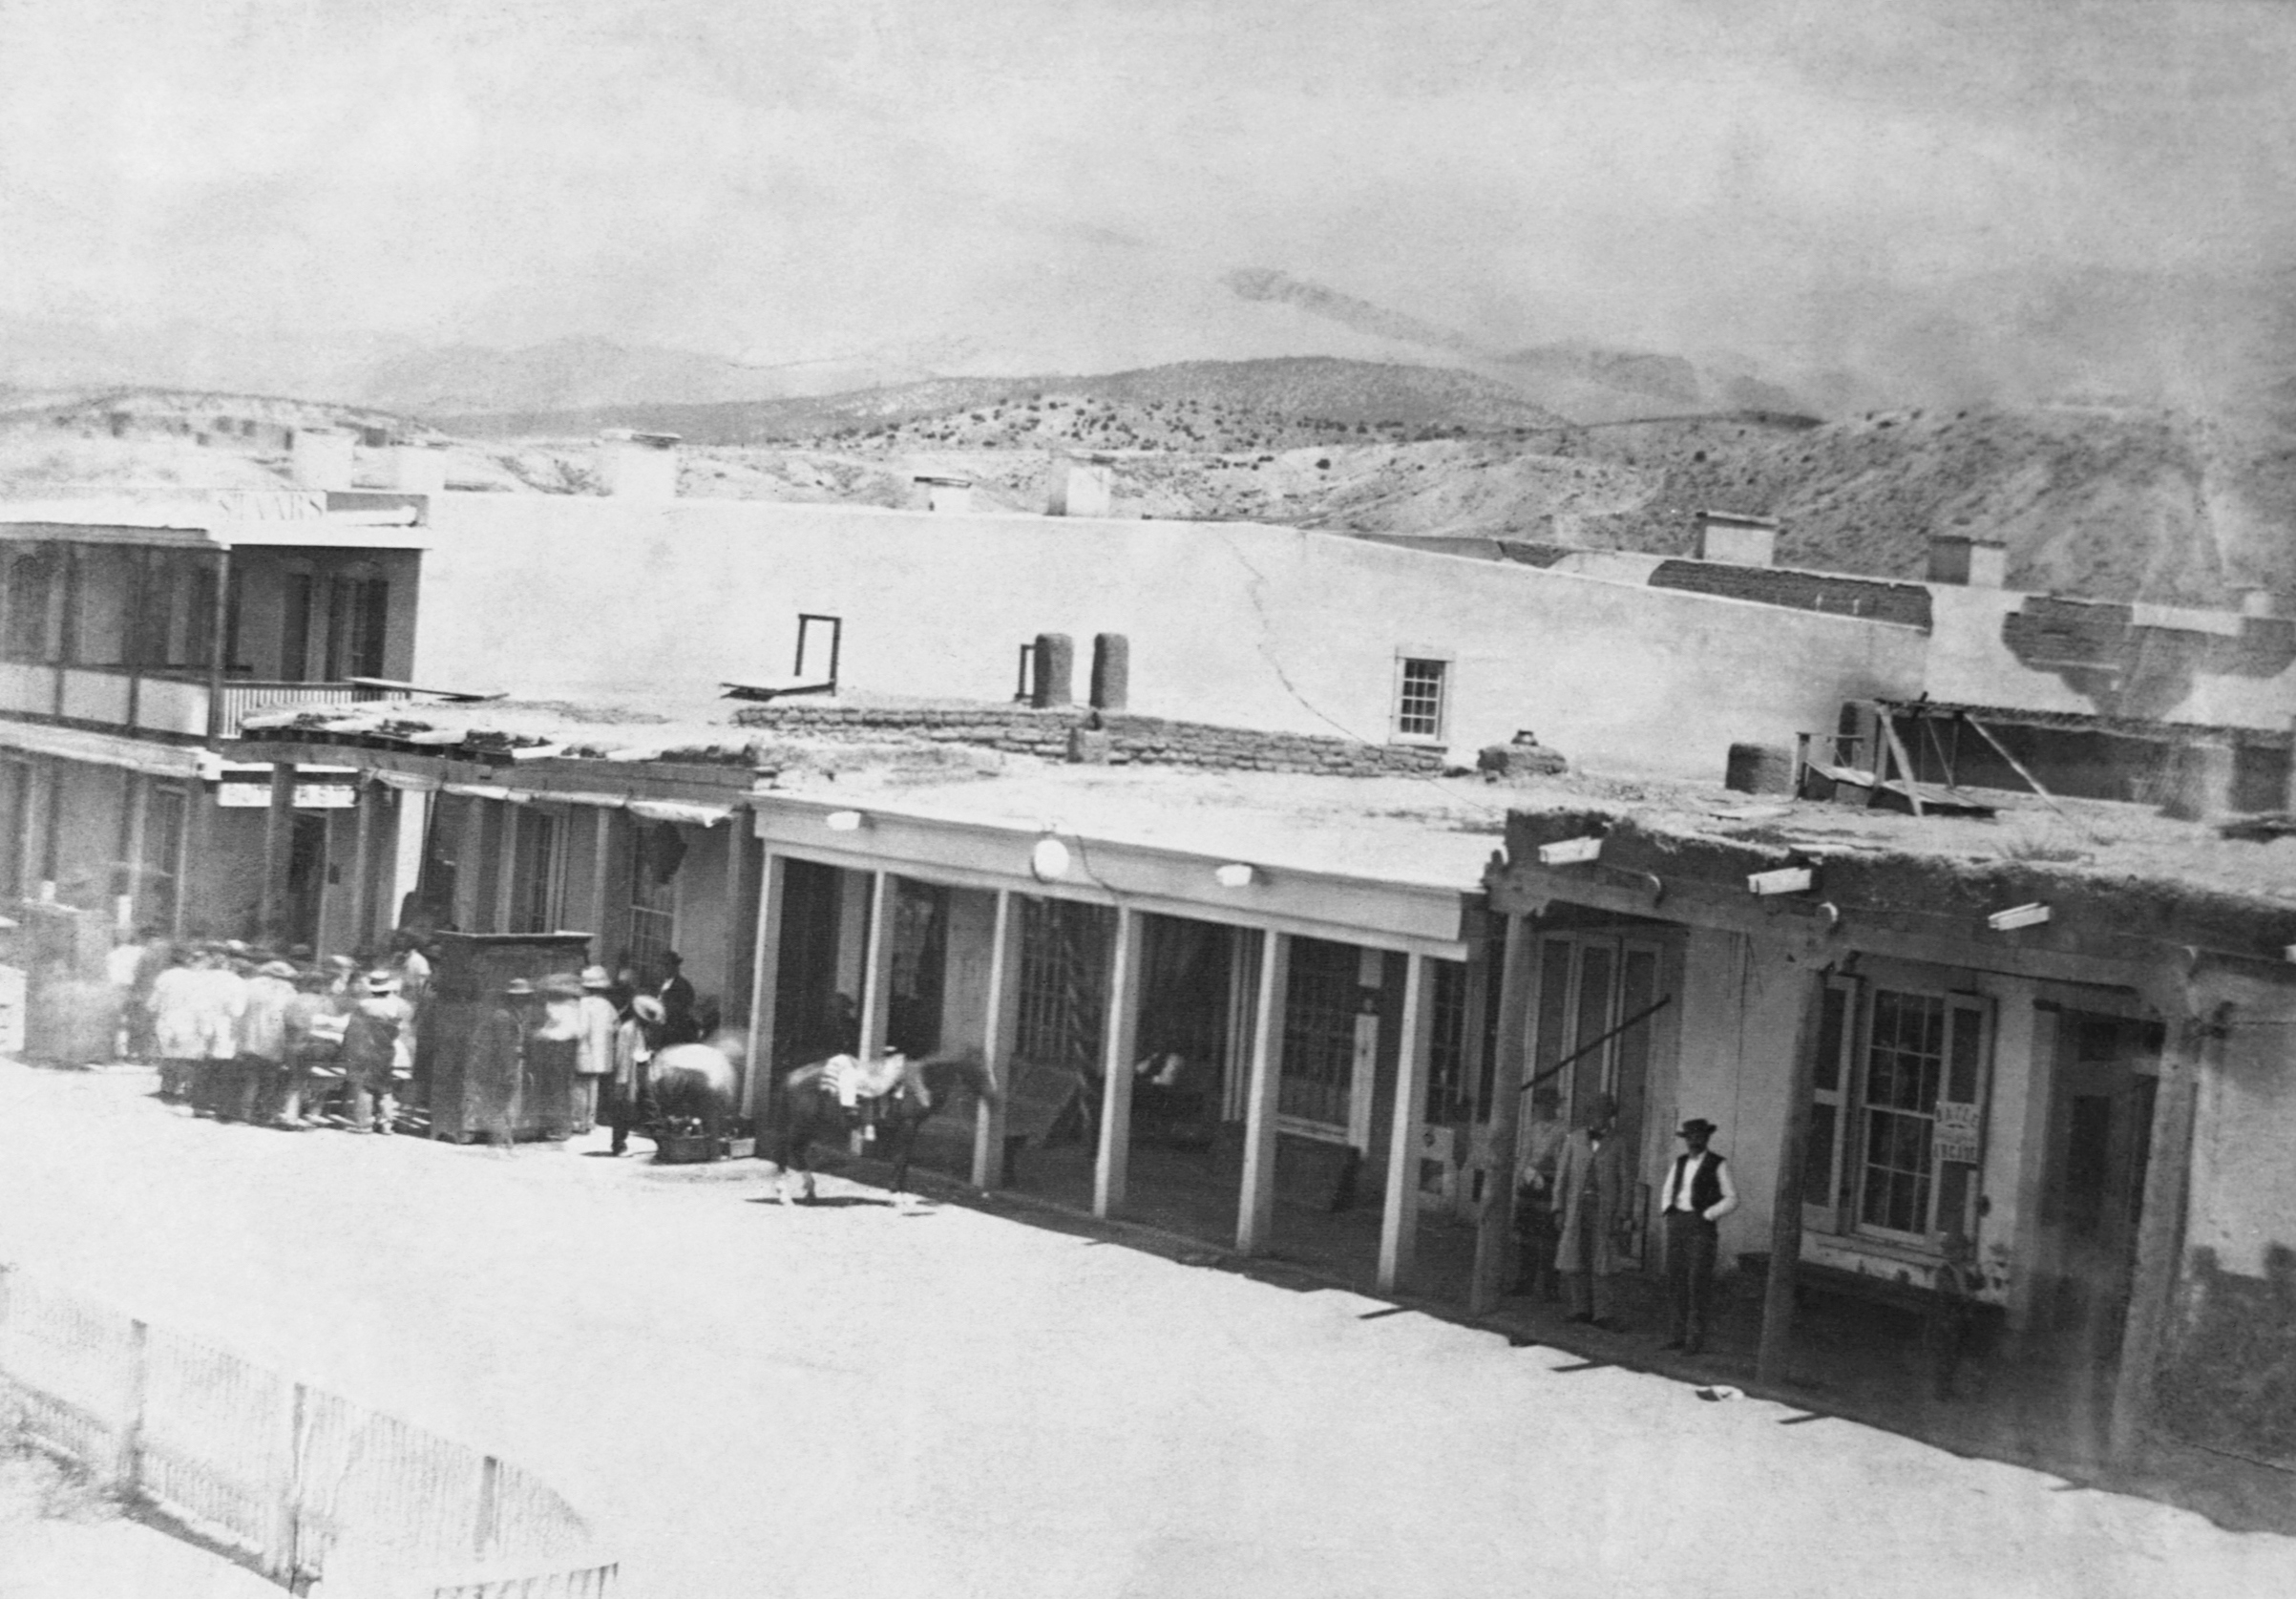 People stand on the sidewalk and in the street at the east side of Plaza in Santa Fe, N.M., 1866. (Corbis via Getty Images)